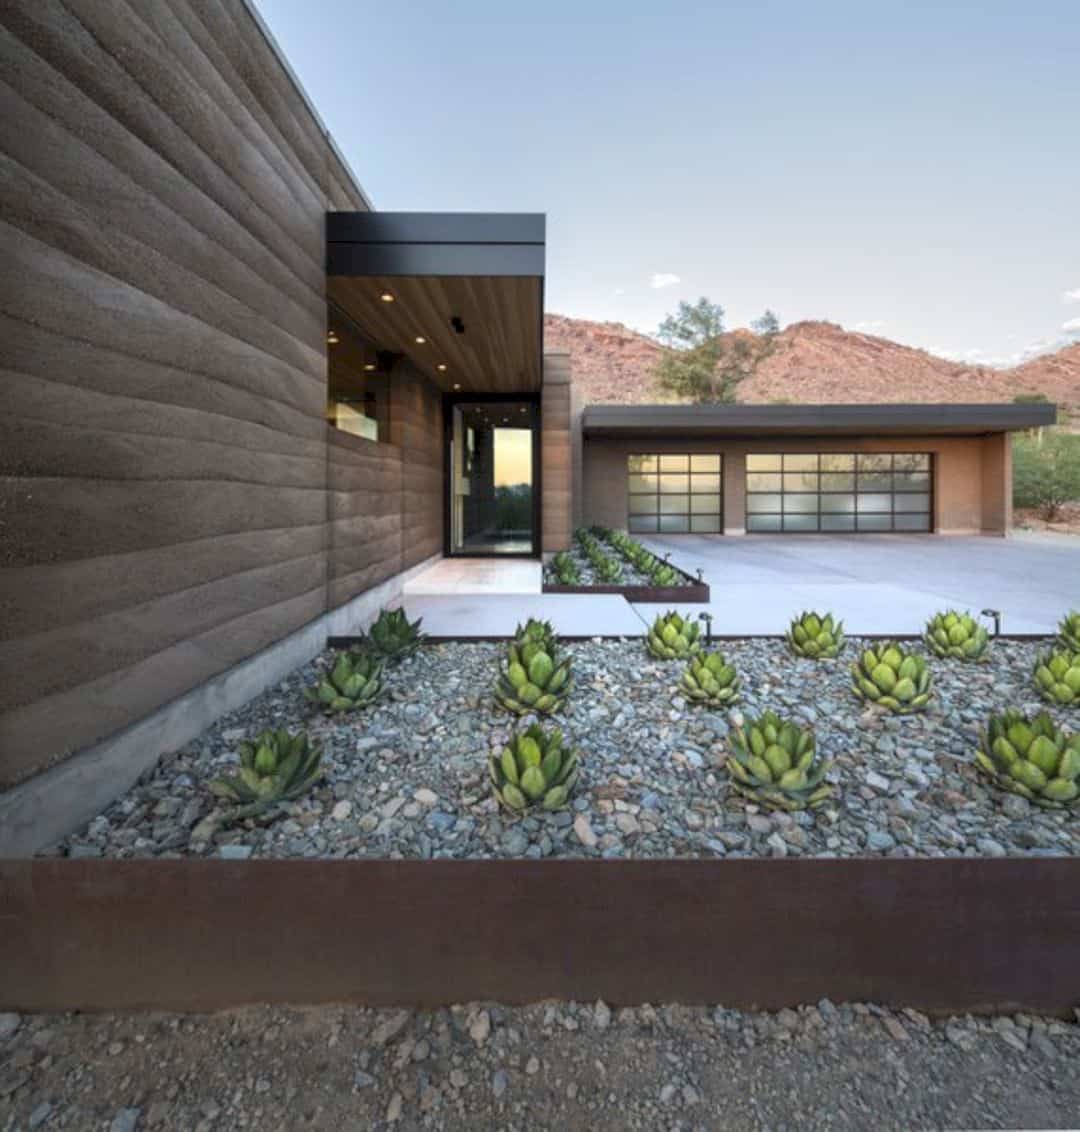 The Rammed Earth Modern Residence A Modest Yet Sophisticated Residence Dominated By Humble Materials 18